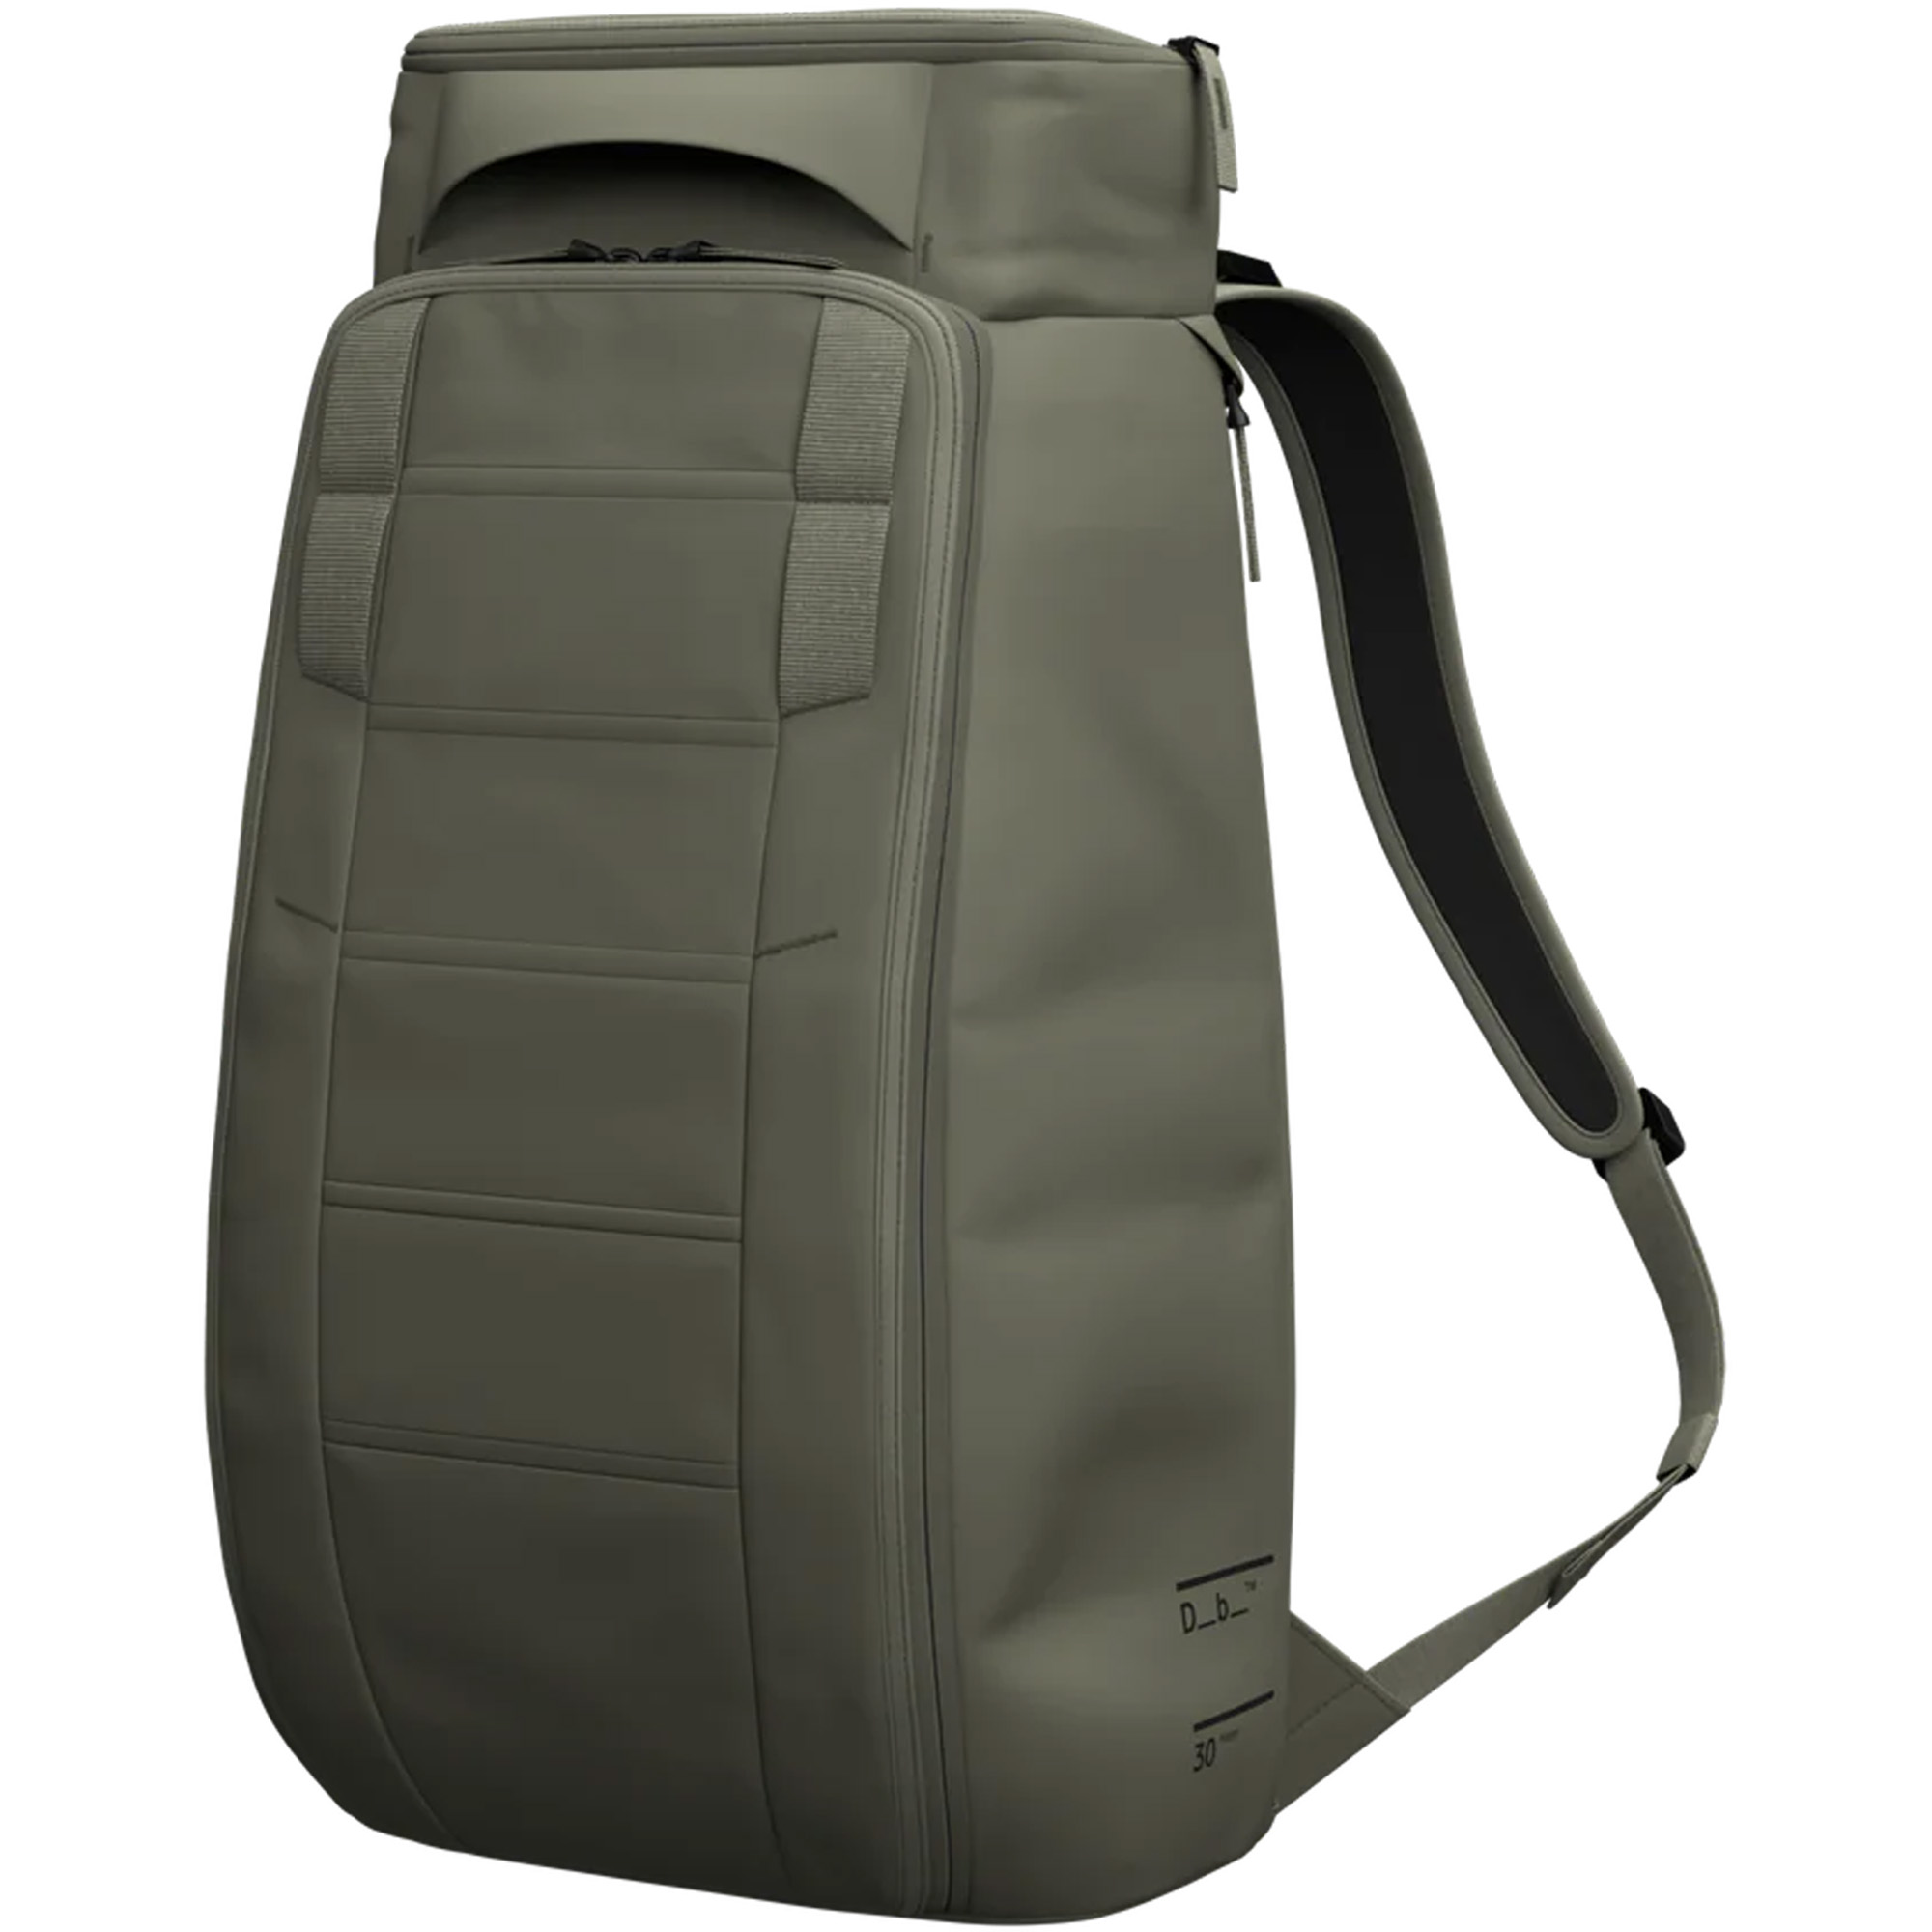 Photos - Backpack Db Hugger 30L Day Pack/, 30 Litres Moss Green 1000176200601